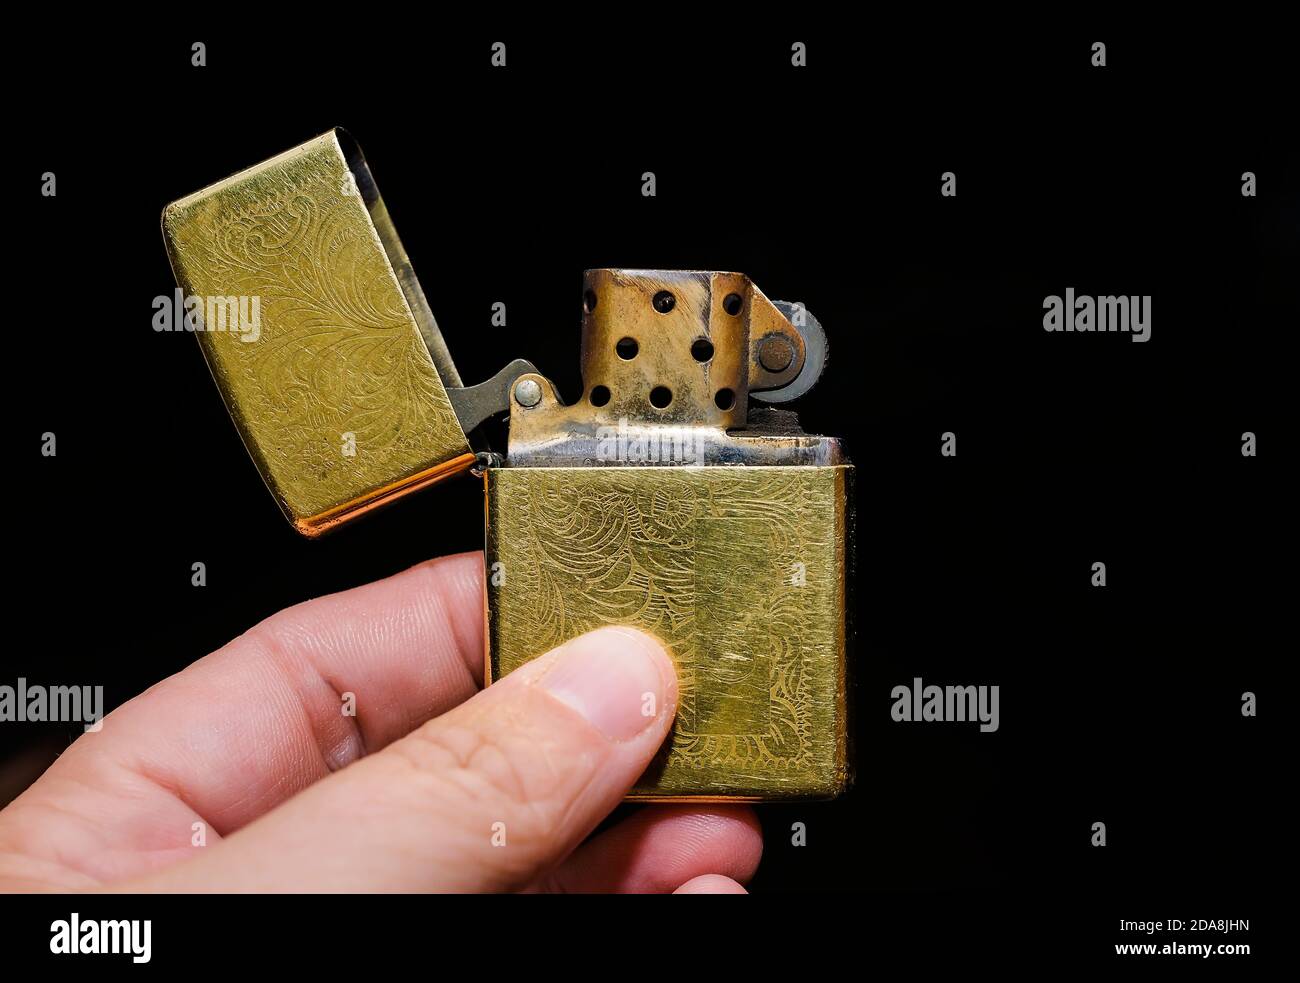 A hand holds a Venetian gold Zippo lighter open and unlit. Zippo lighters  are reusable metal lighters manufactured by American Zippo Manufacturing  Stock Photo - Alamy